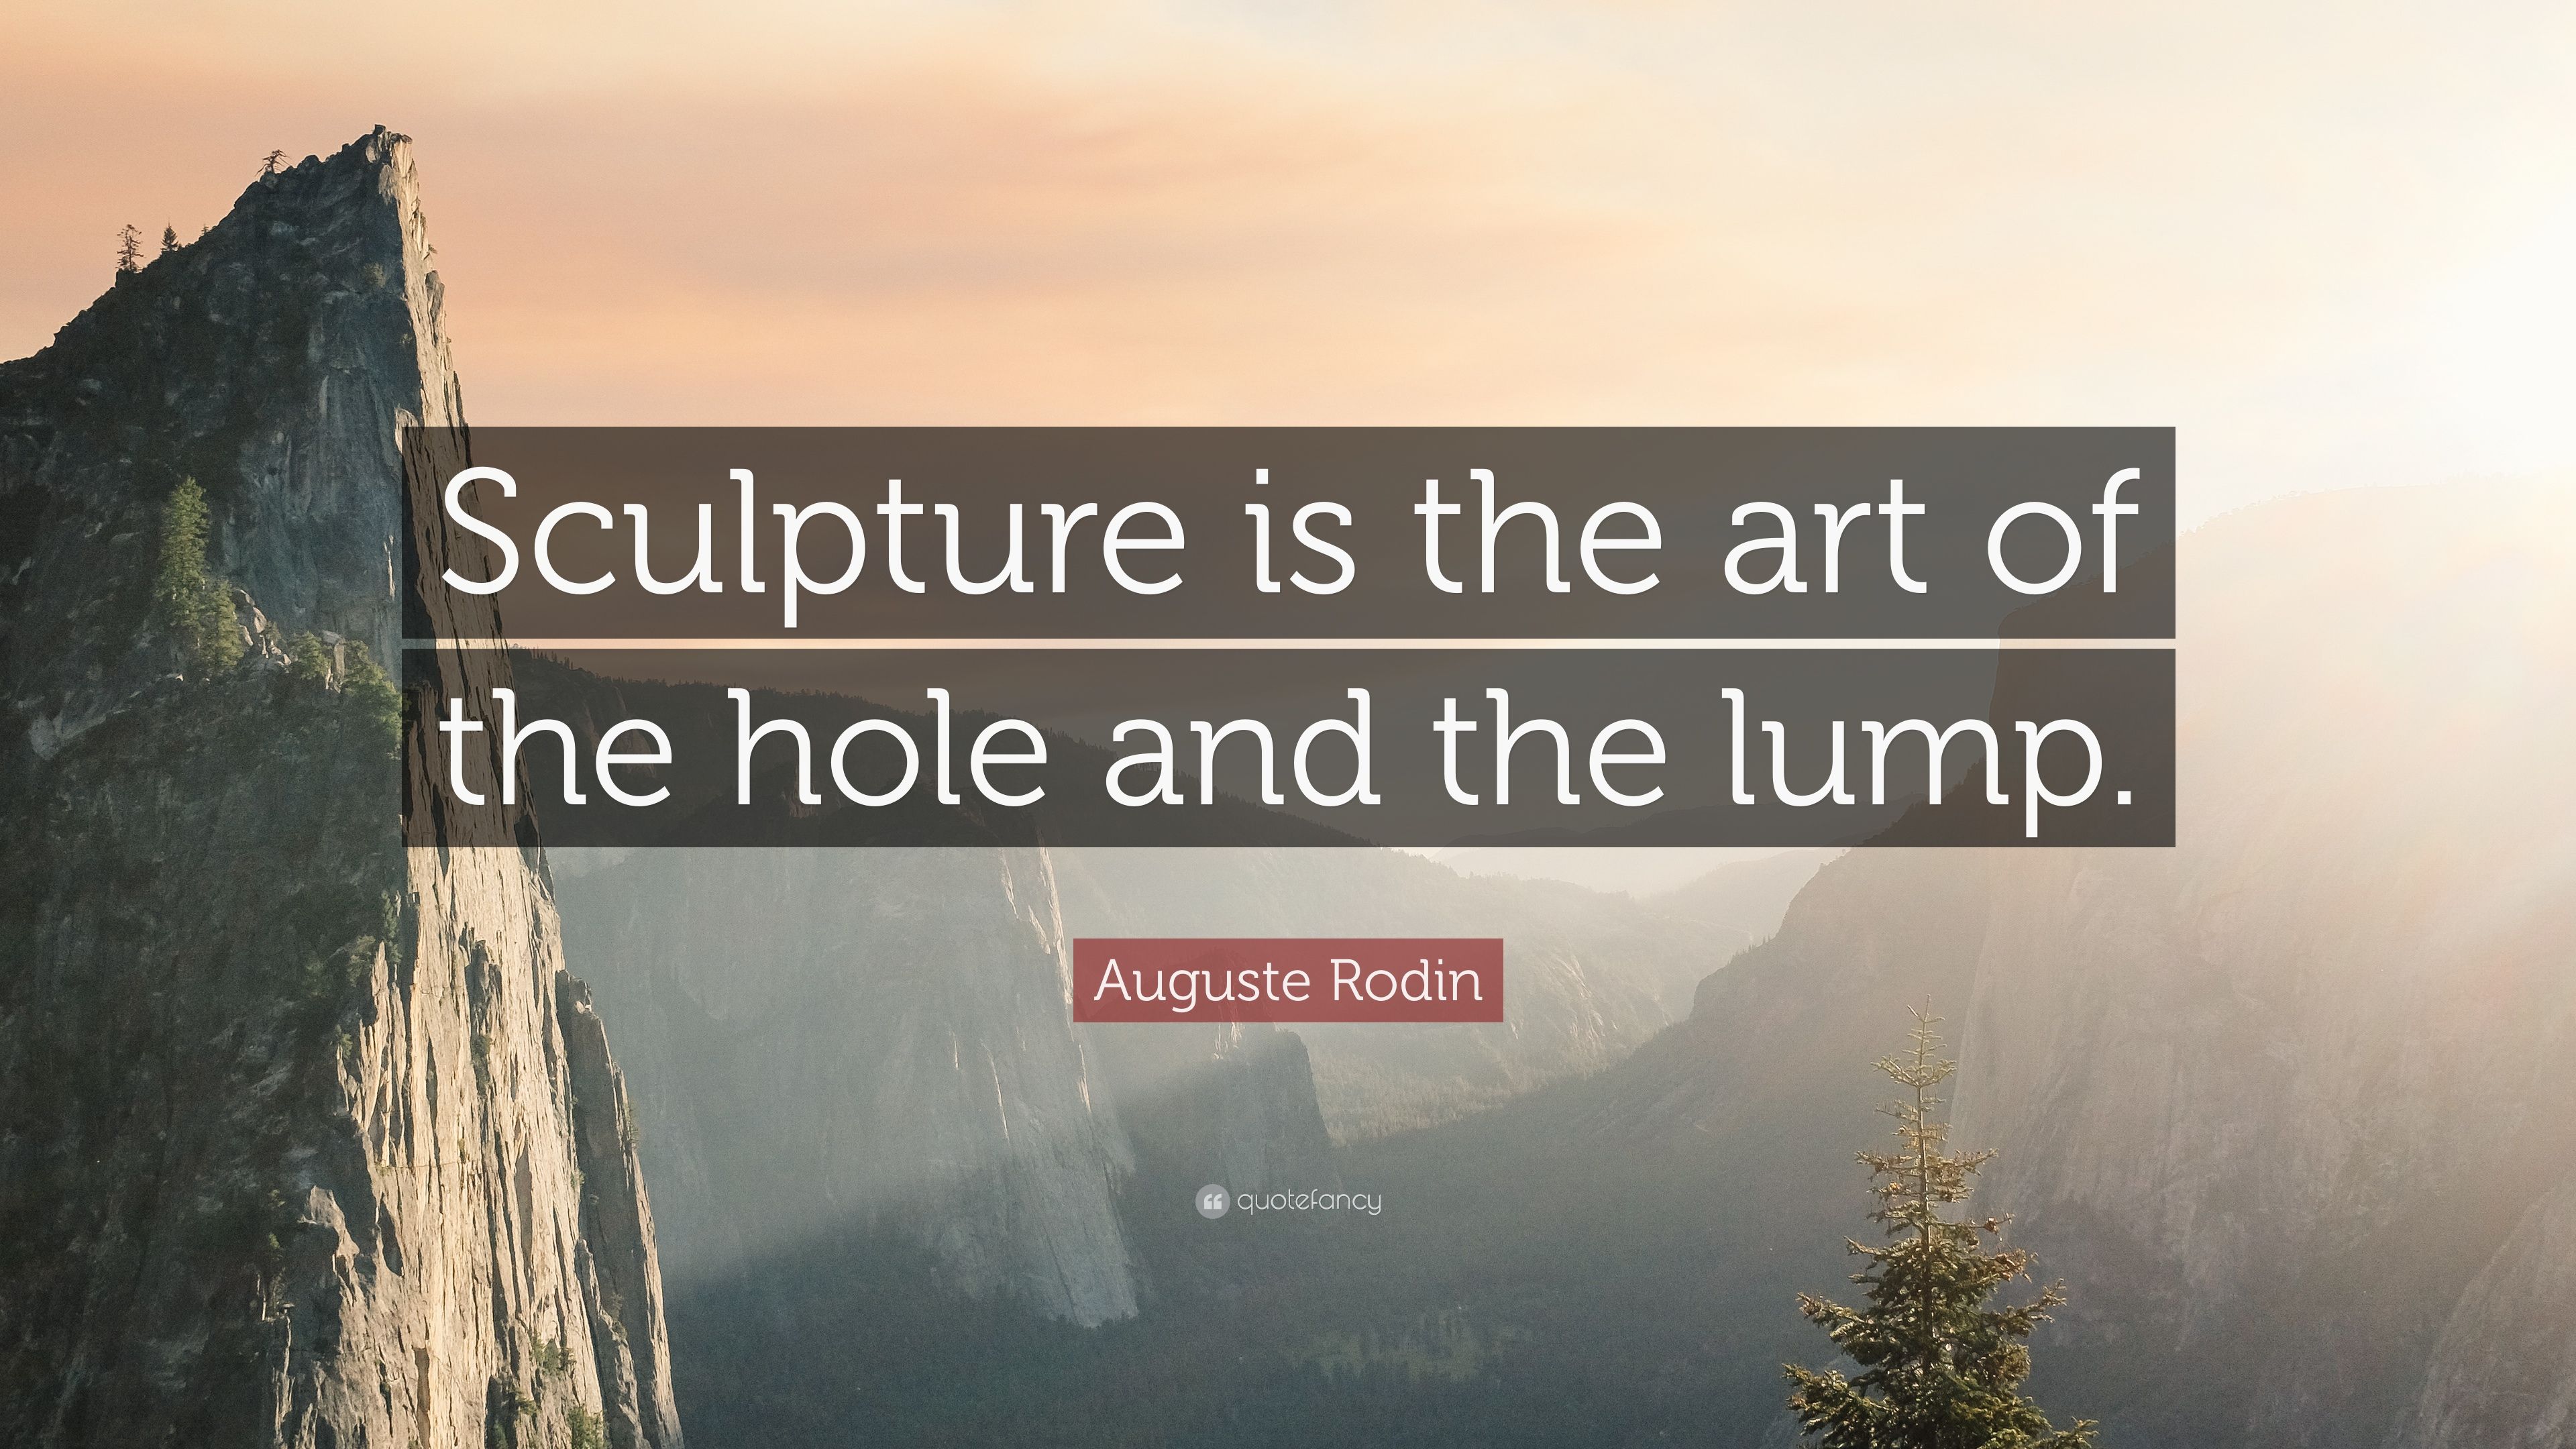 Auguste Rodin Quote: “Sculpture is the art of the hole and the lump.” (7 wallpaper)